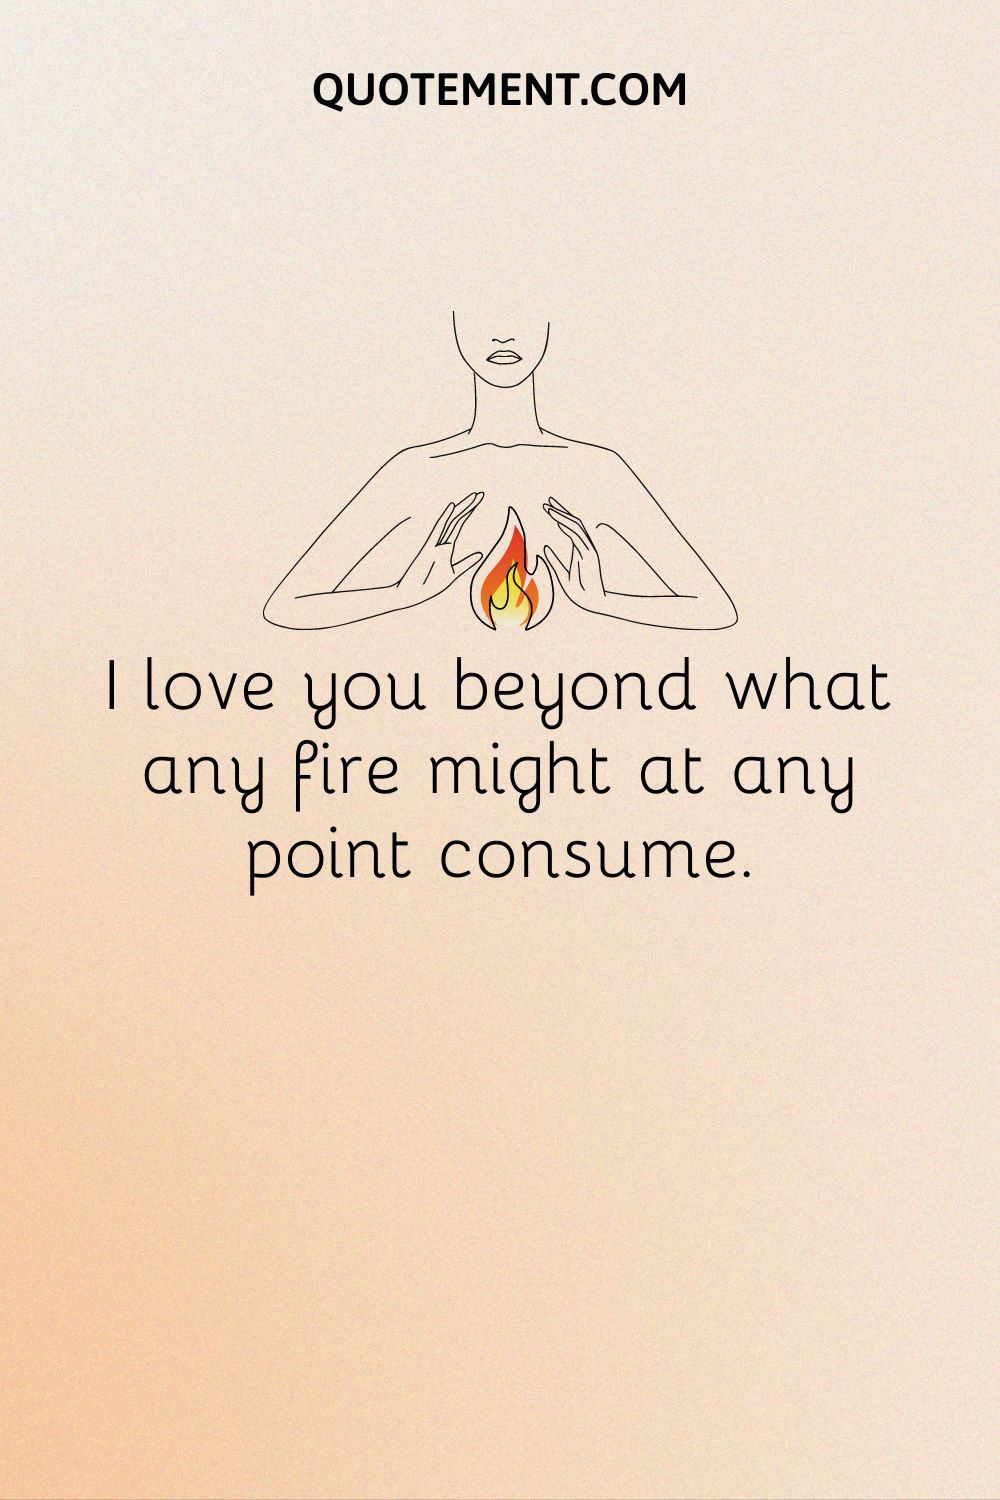 I love you beyond what any fire might at any point consume